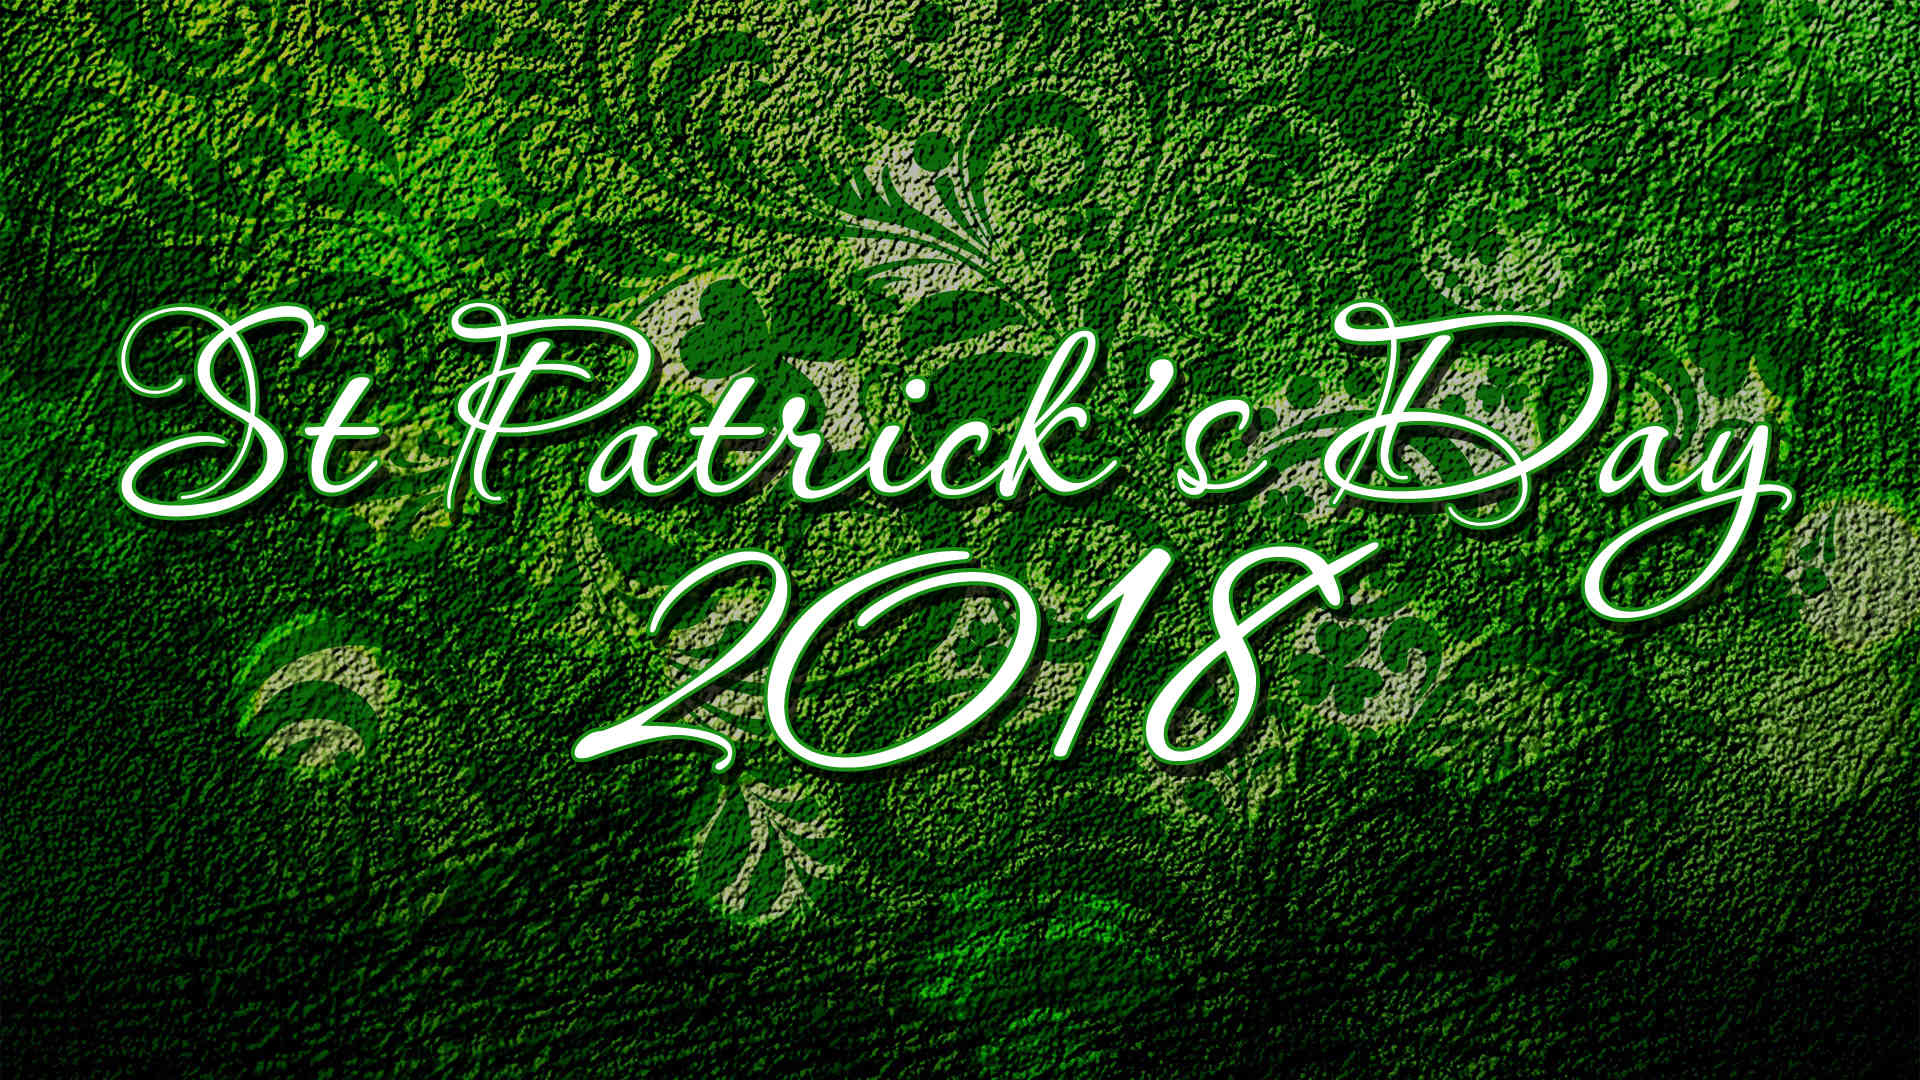 Happy St Patrick Day 2018 Image Picture for Irish People